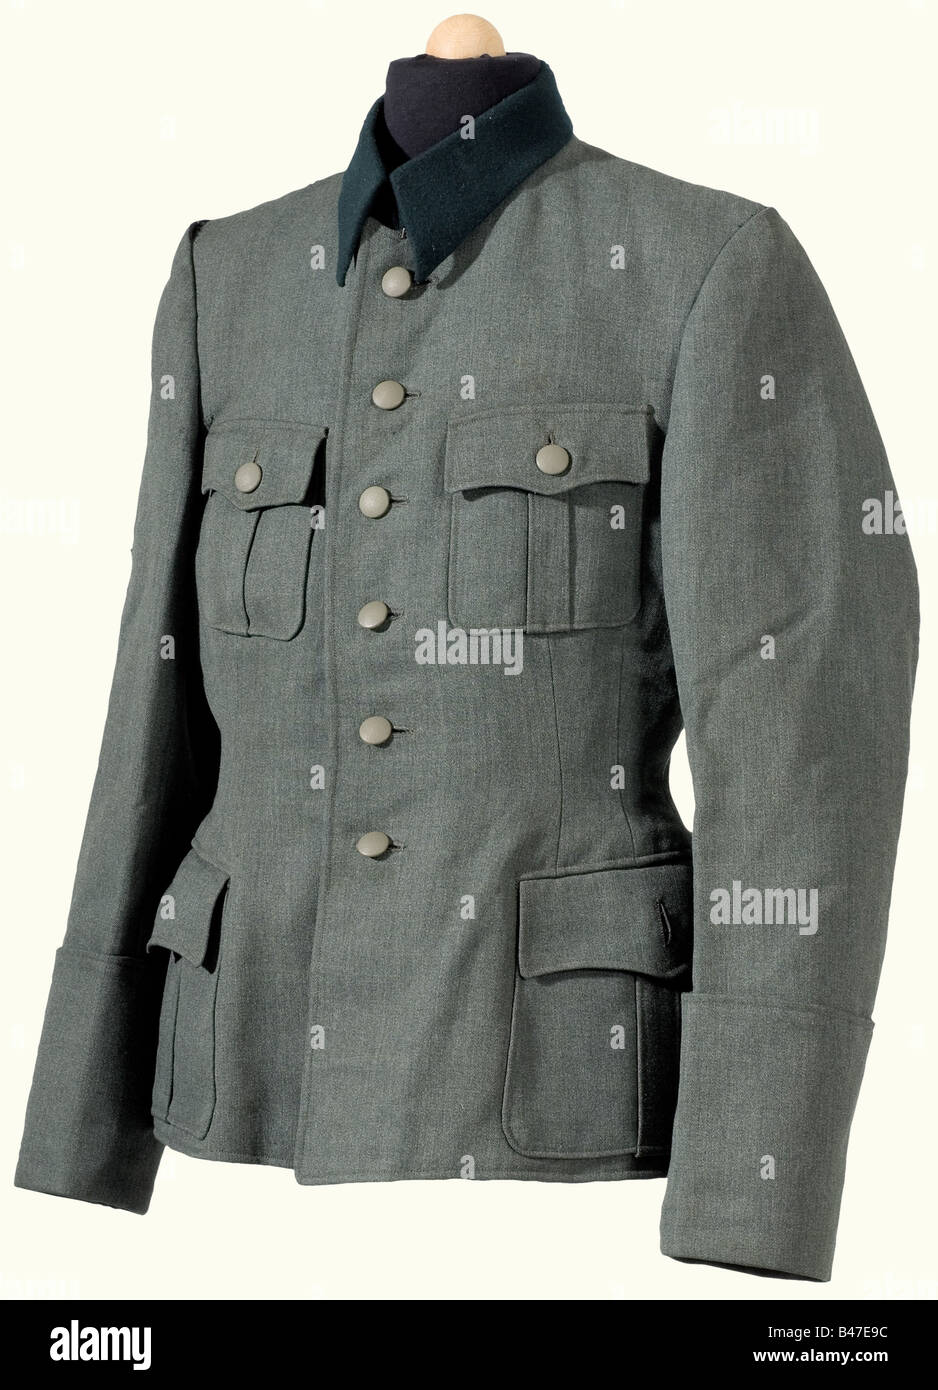 A tunic for an SS Officer., Field grey Italian gabardine, dark green collar, grey silk lining, field grey buttons, passage for a sidearm, marks where there was a sleeve band. historic, historical, 1930s, 1930s, 20th century, Waffen-SS, armed division of the SS, armed service, armed services, NS, National Socialism, Nazism, Third Reich, German Reich, Germany, military, militaria, utensil, piece of equipment, utensils, object, objects, stills, clipping, clippings, cut out, cut-out, cut-outs, fascism, fascistic, National Socialist, Nazi, Nazi period, uniform, unif, Stock Photo